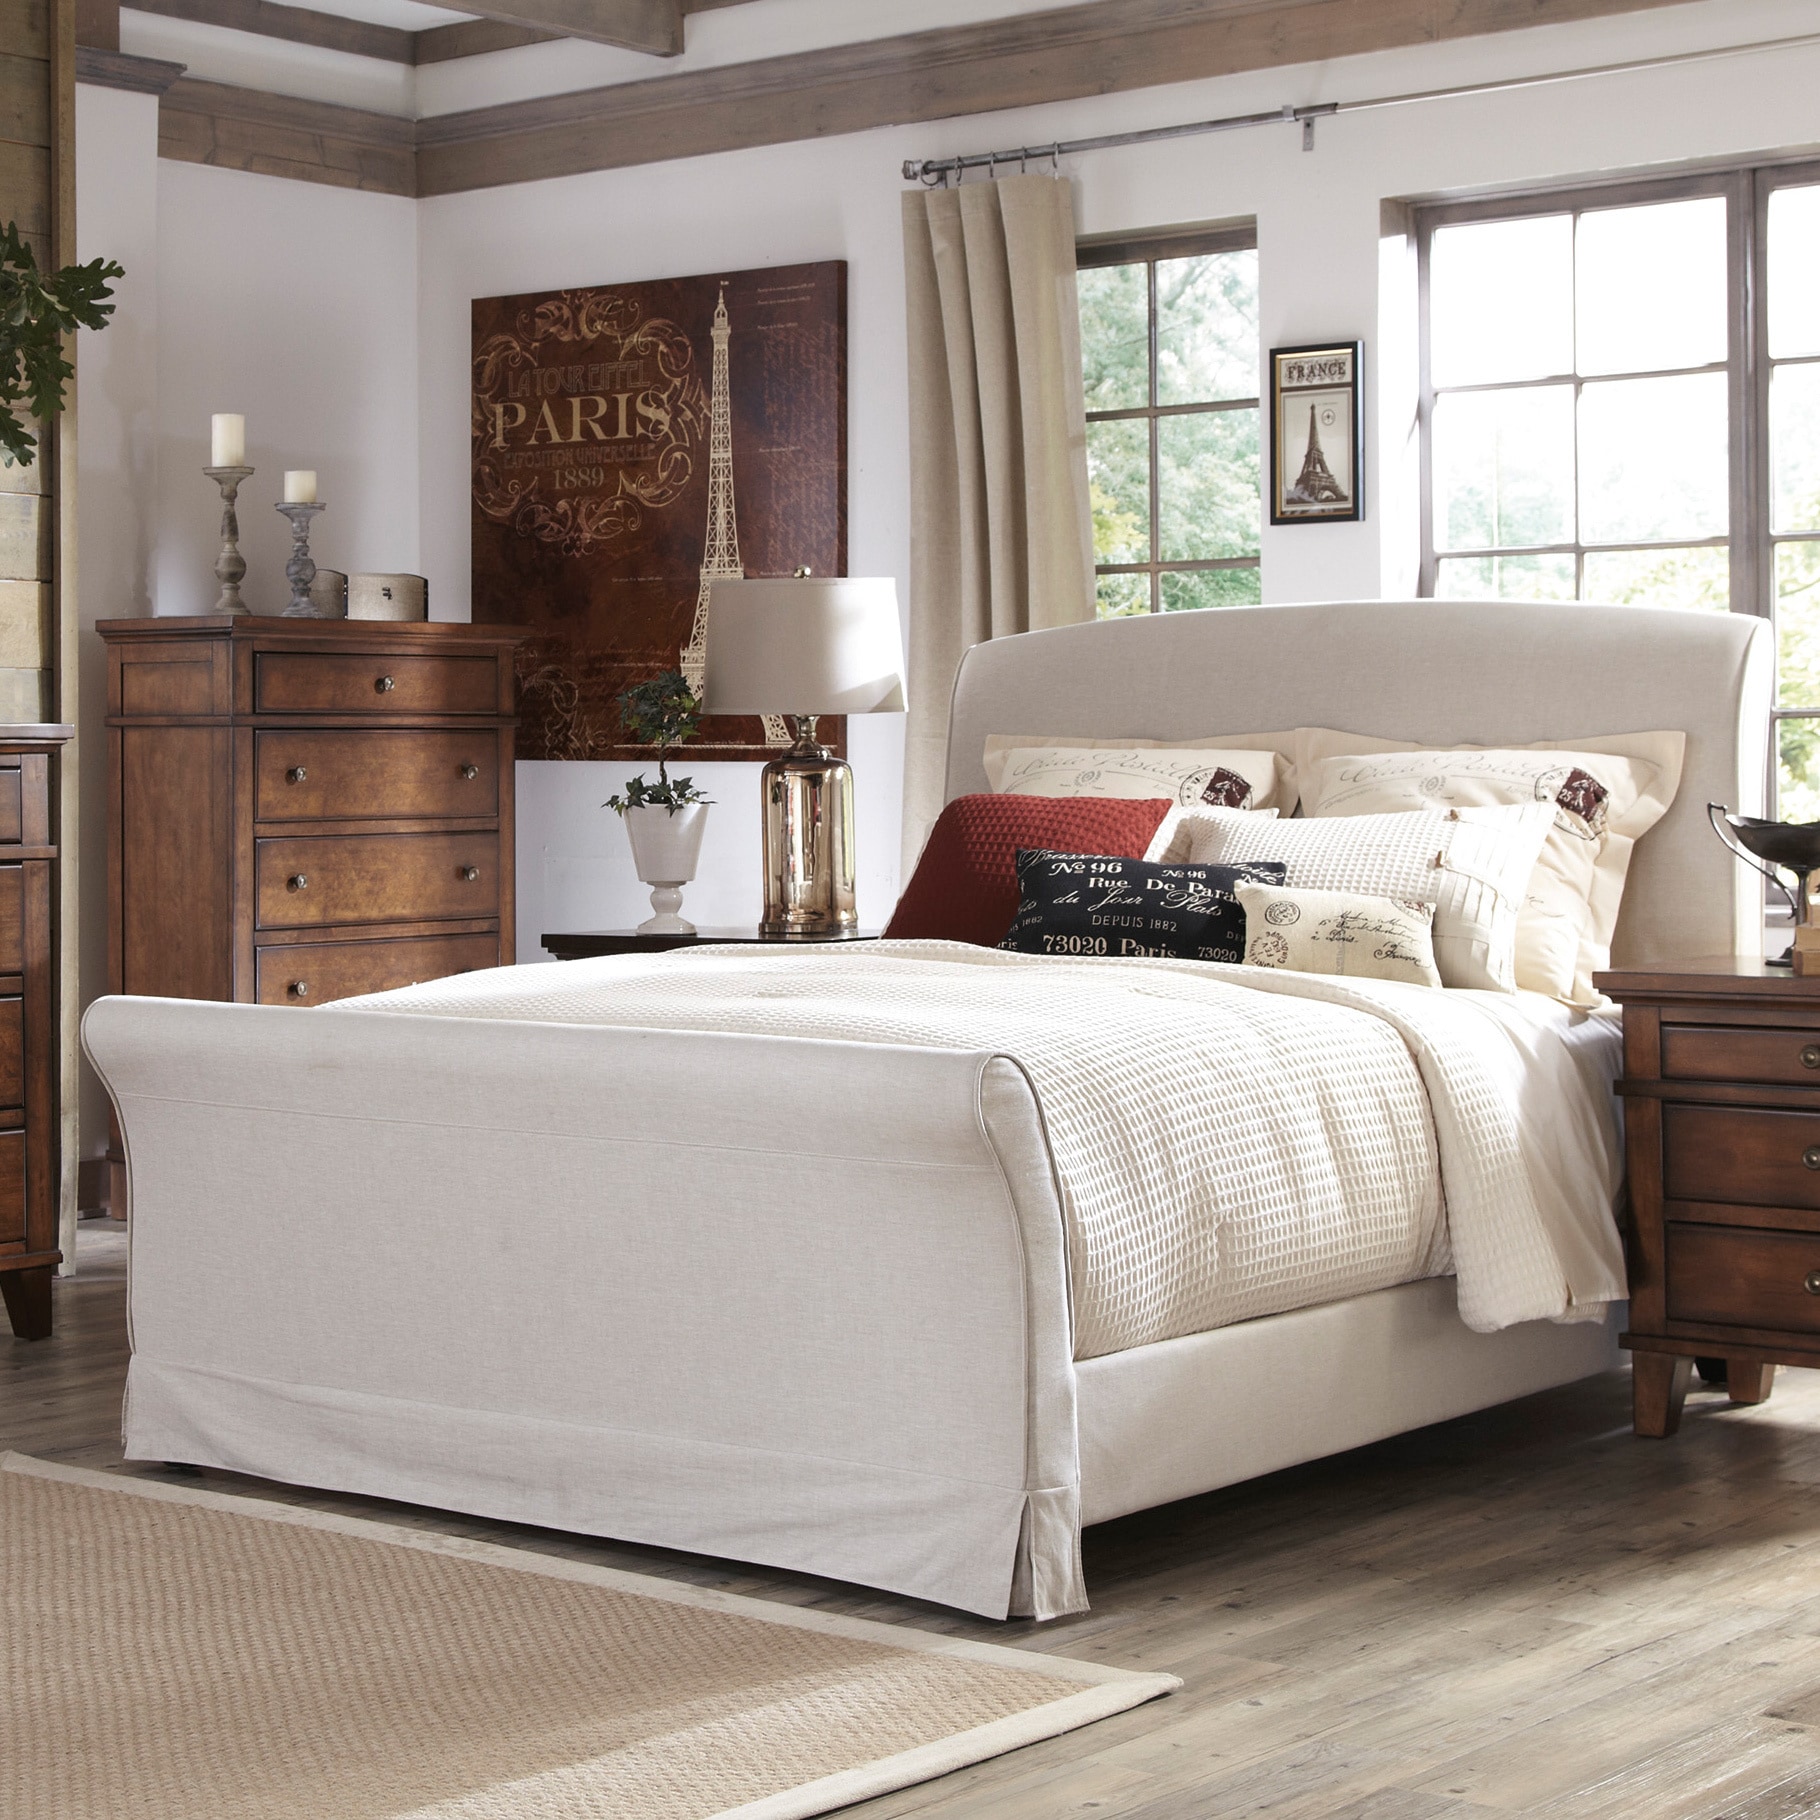 Signature Design By Ashley Burkesville Burnished Brown Upholstered Queen Sleigh Bed